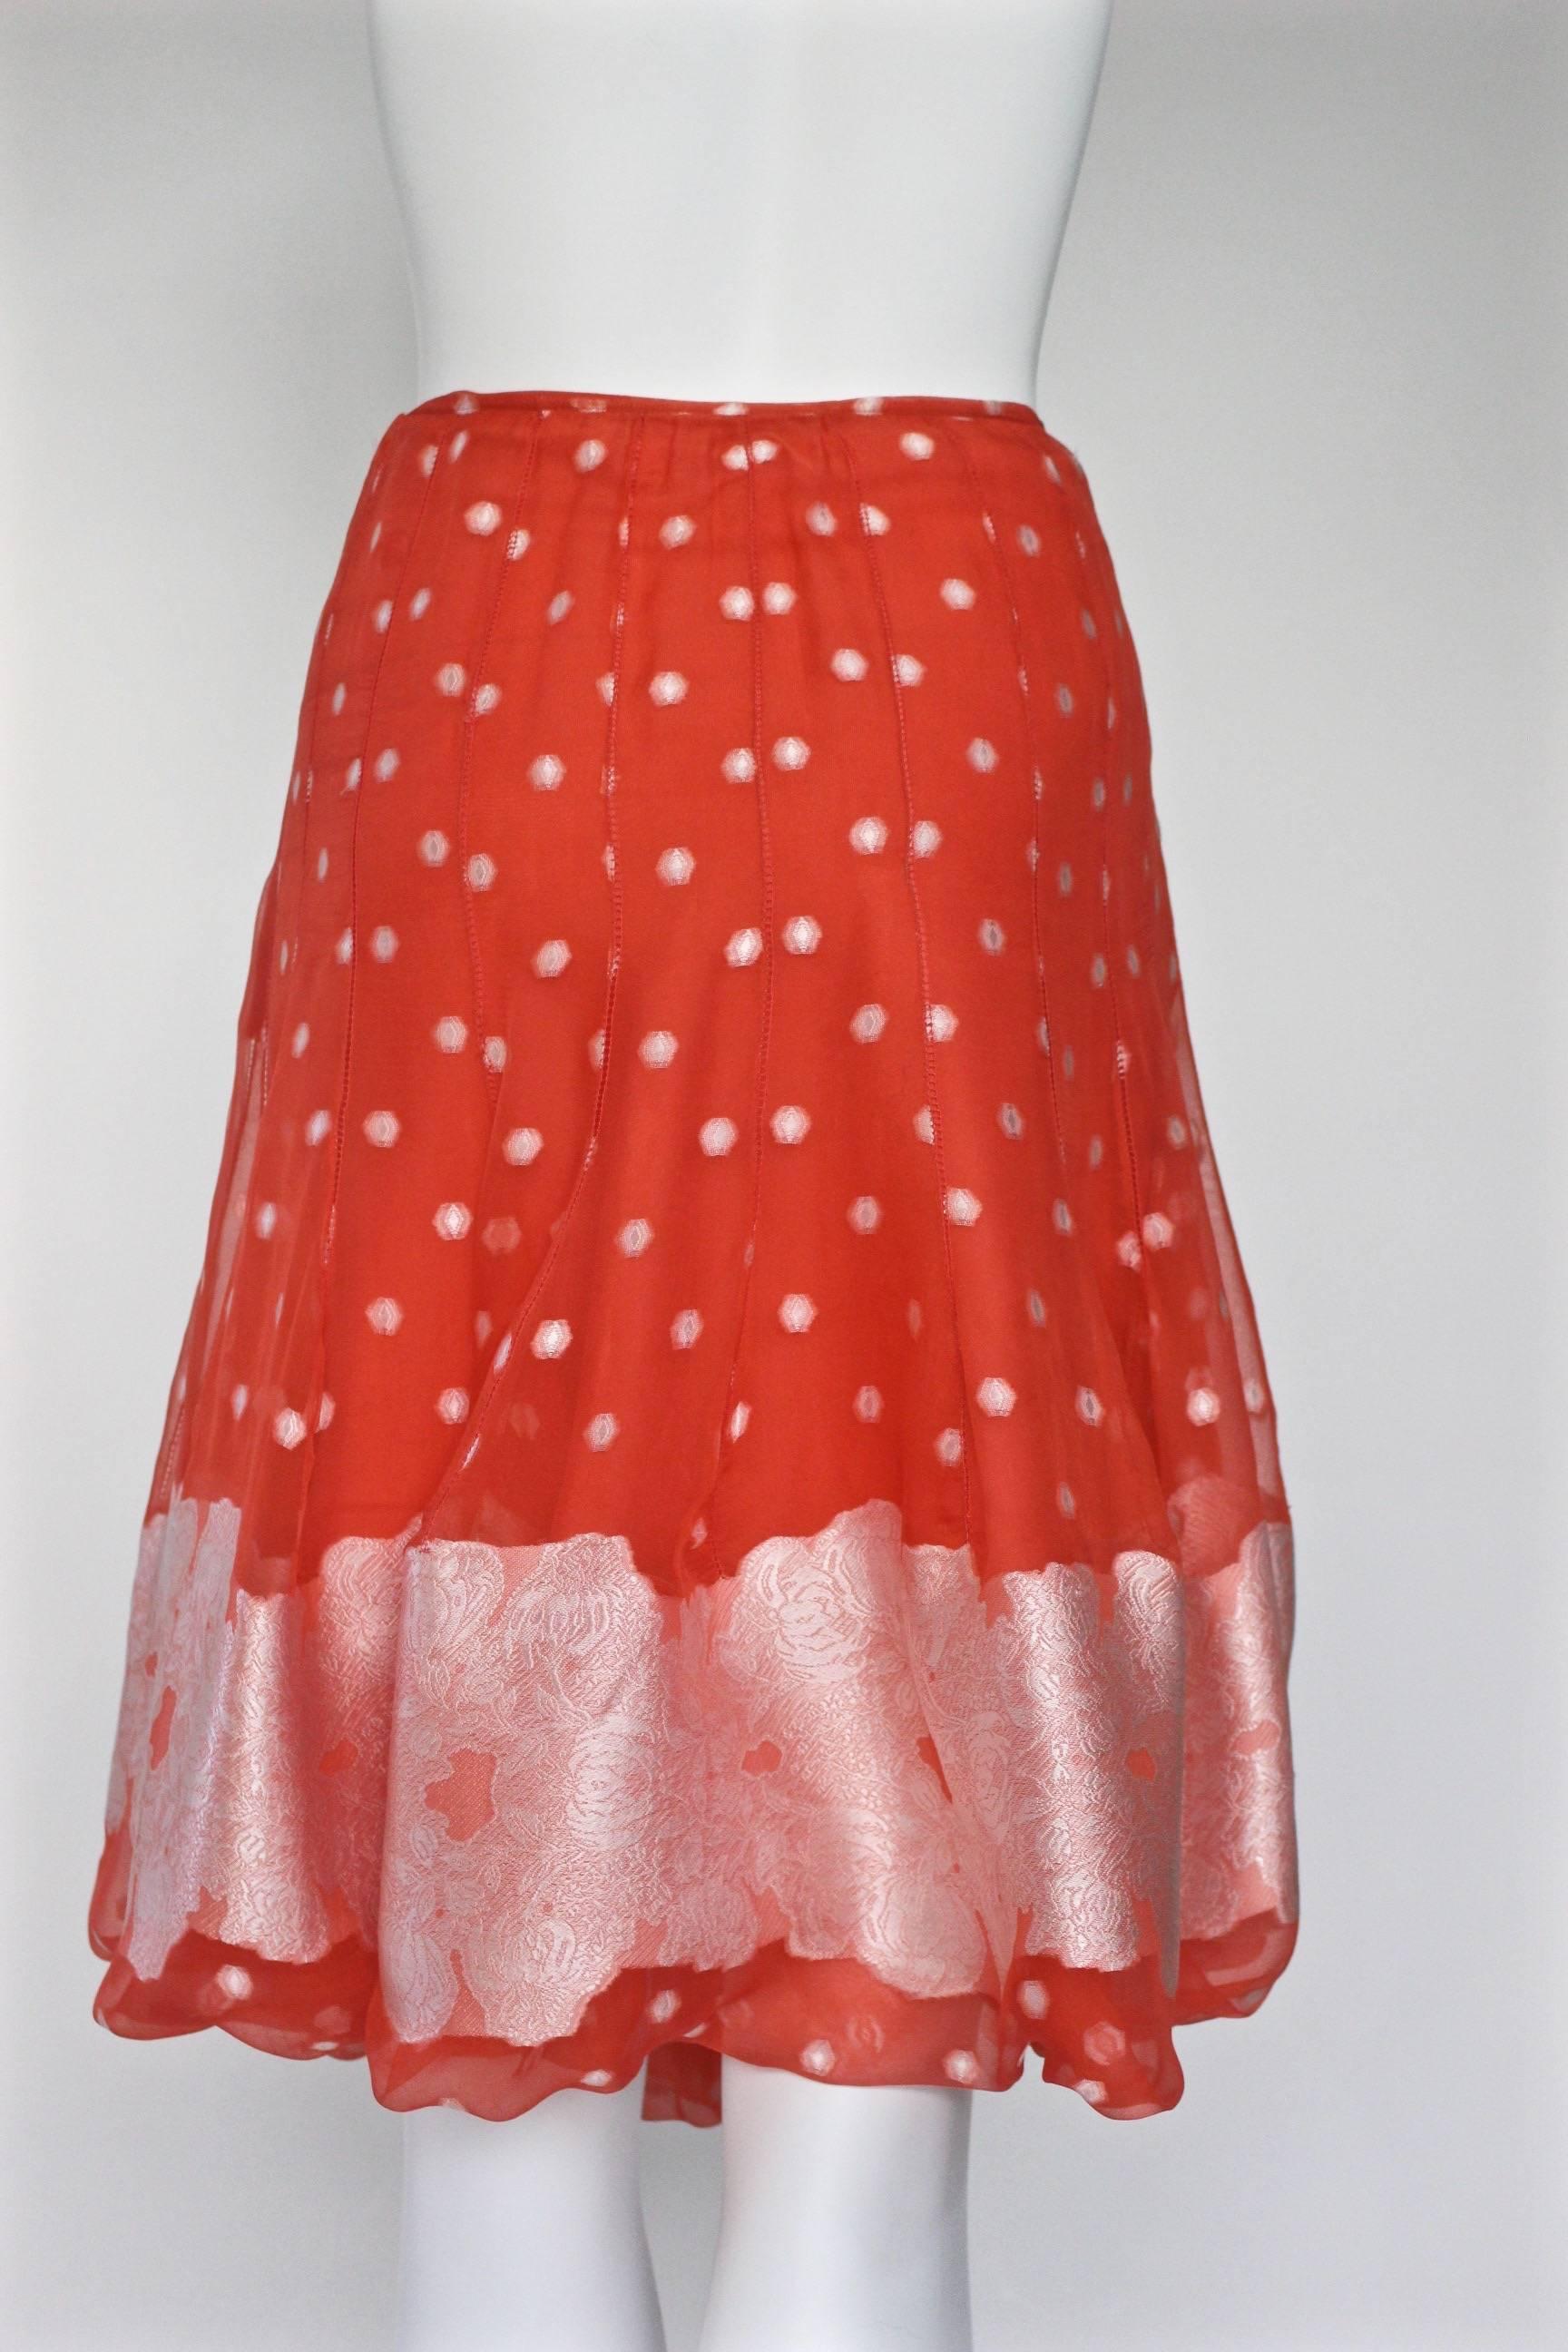 Nina Ricci Tangerine and White Floral Embroidery Silk Skirt 4